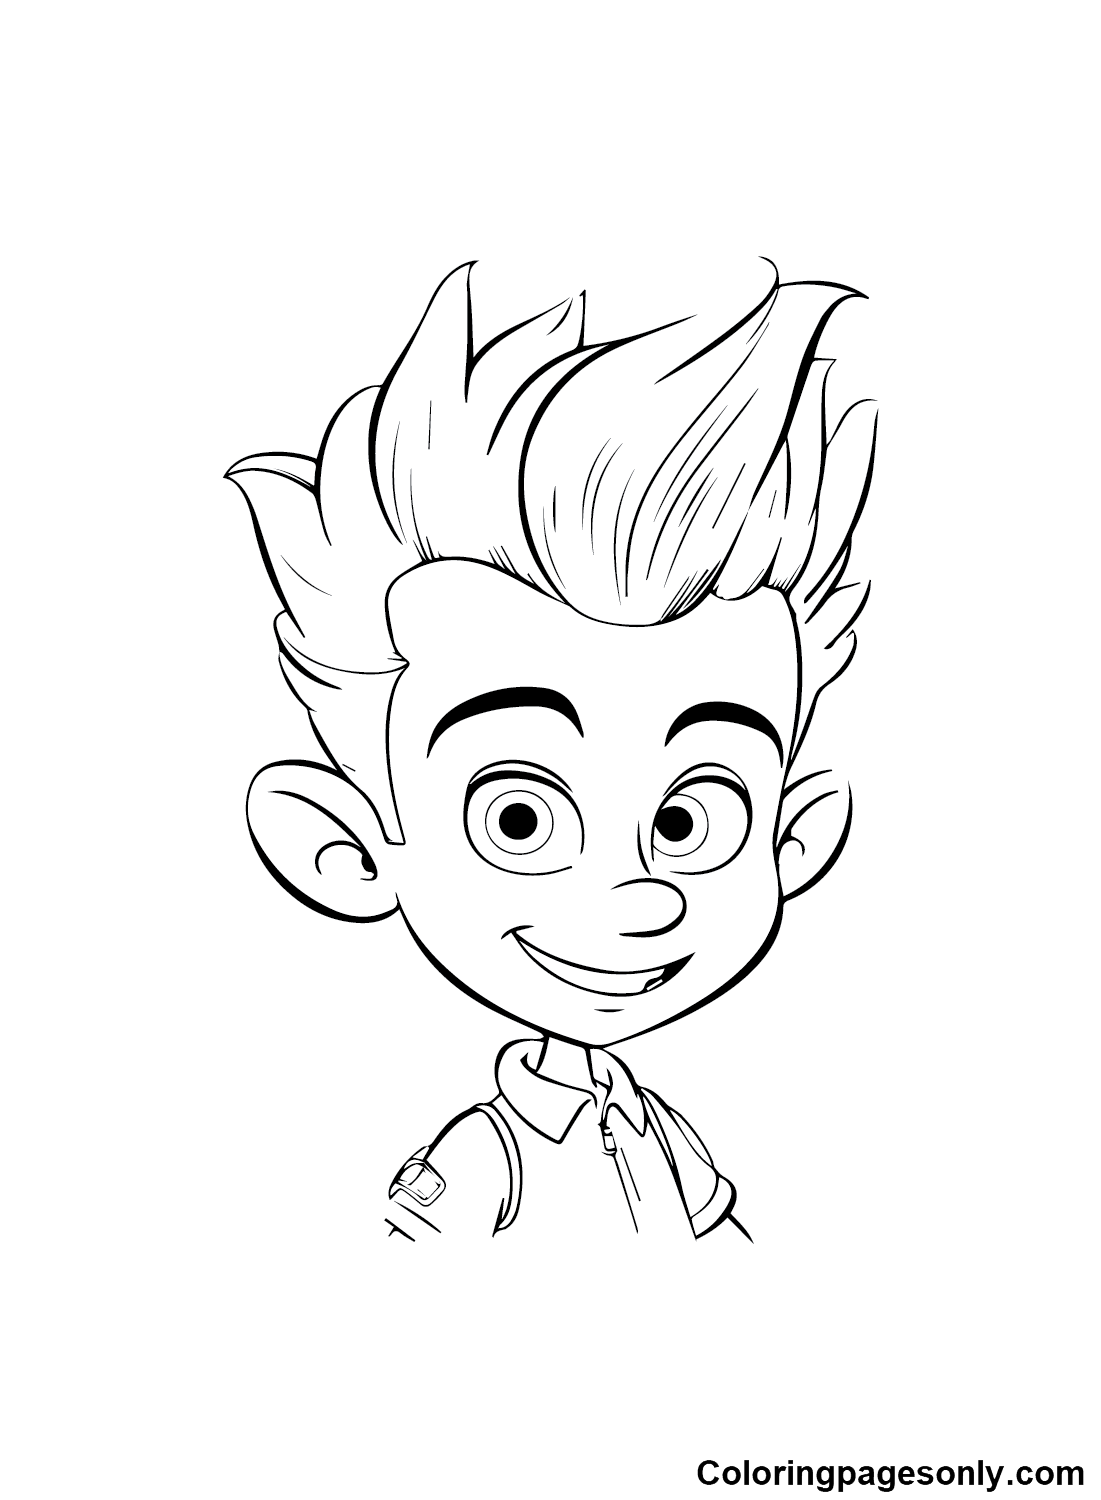 Jimmy Neutron color Sheets Coloring Page